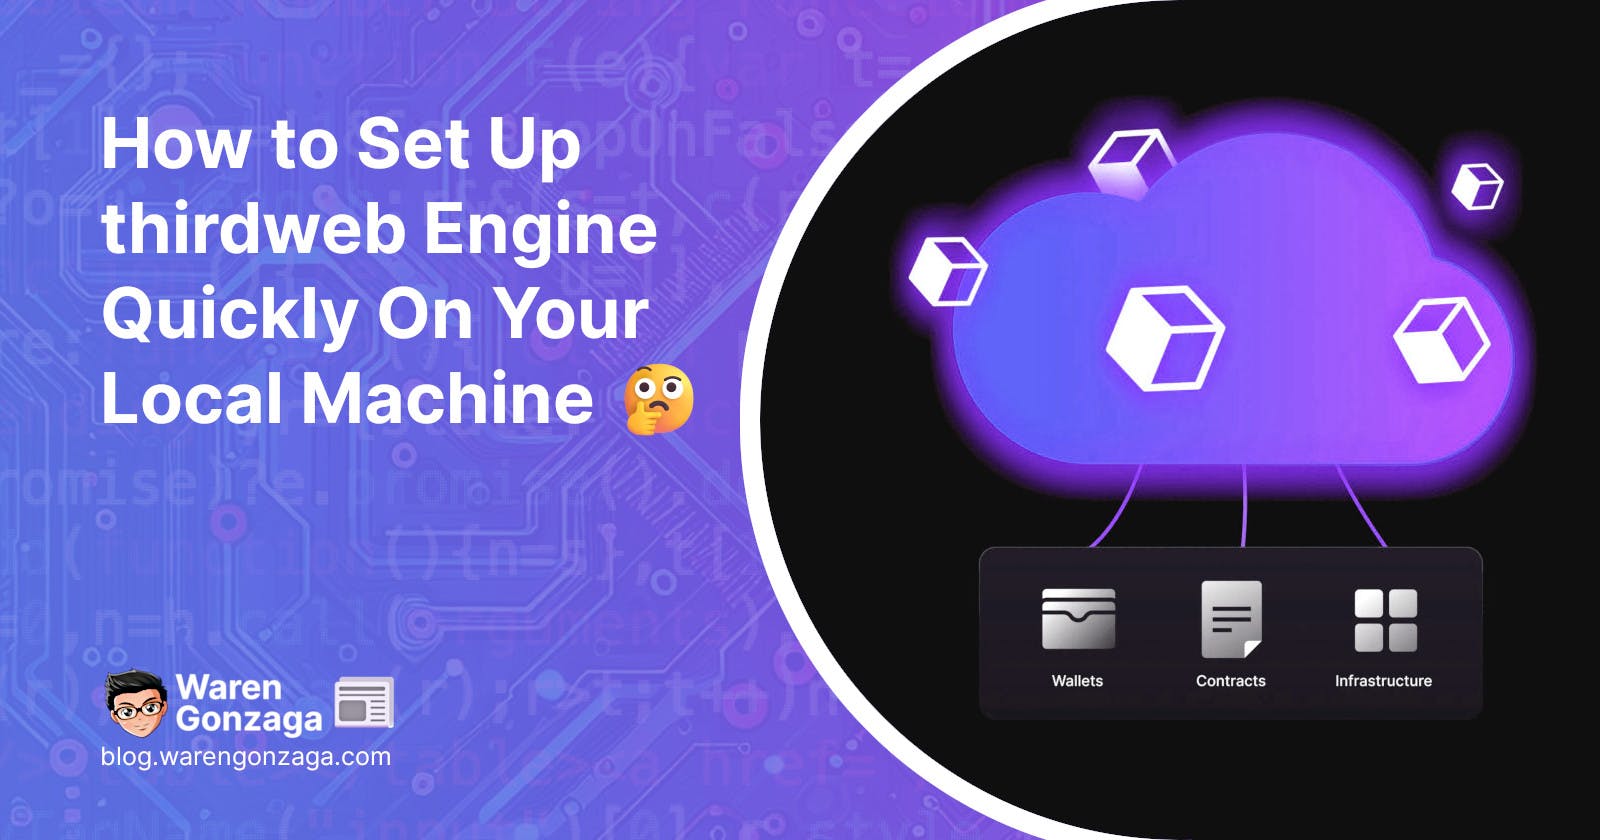 How to Set Up thirdweb Engine Quickly On Your Local Machine